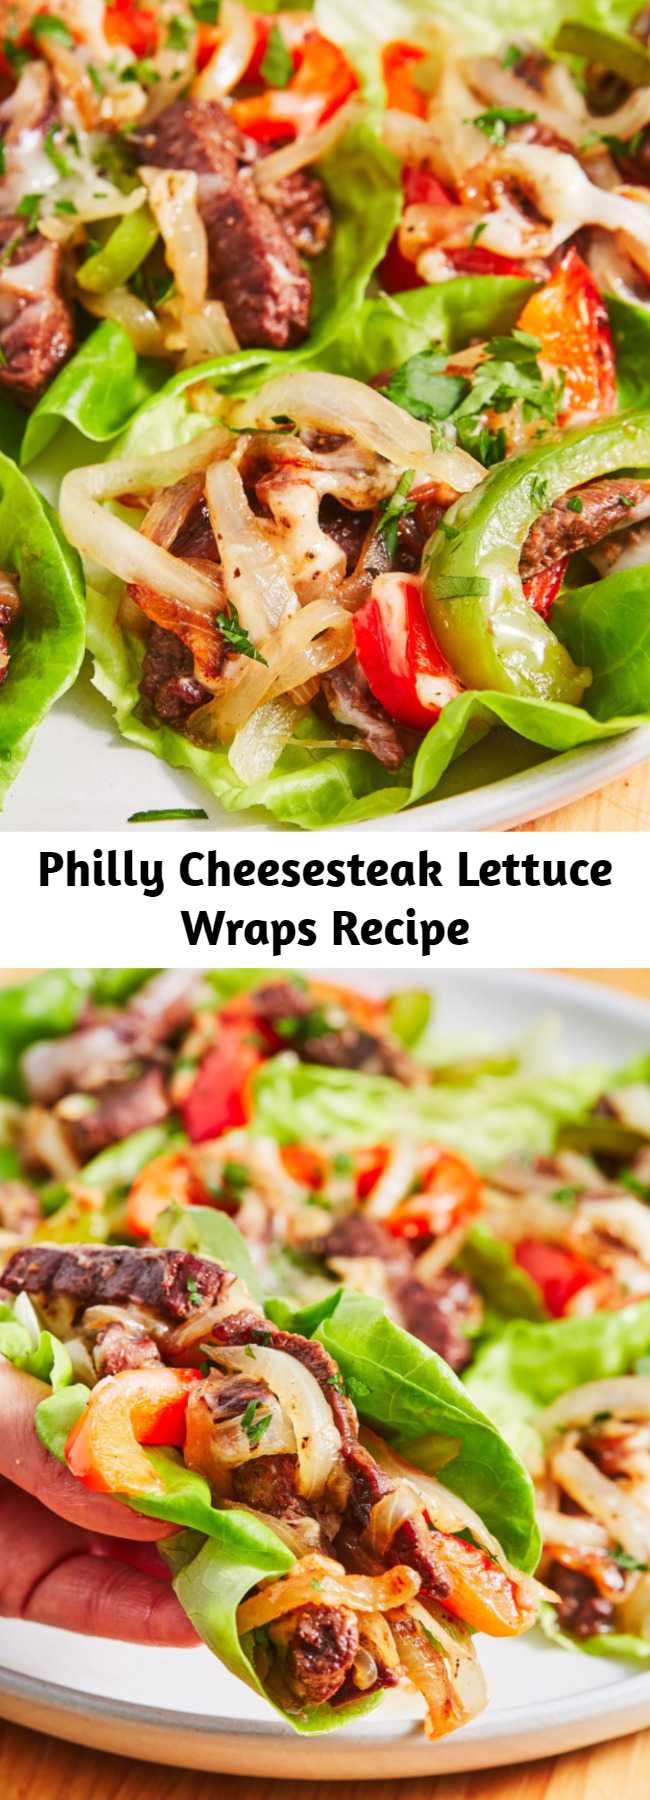 Philly Cheesesteak Lettuce Wraps Recipe - You won't miss the hoagie in these low-carb Philly Cheesesteak lettuce wraps. Make your favorite sandwich without the carbs. #food #healthyeating #gf #glutenfree #easyrecipe